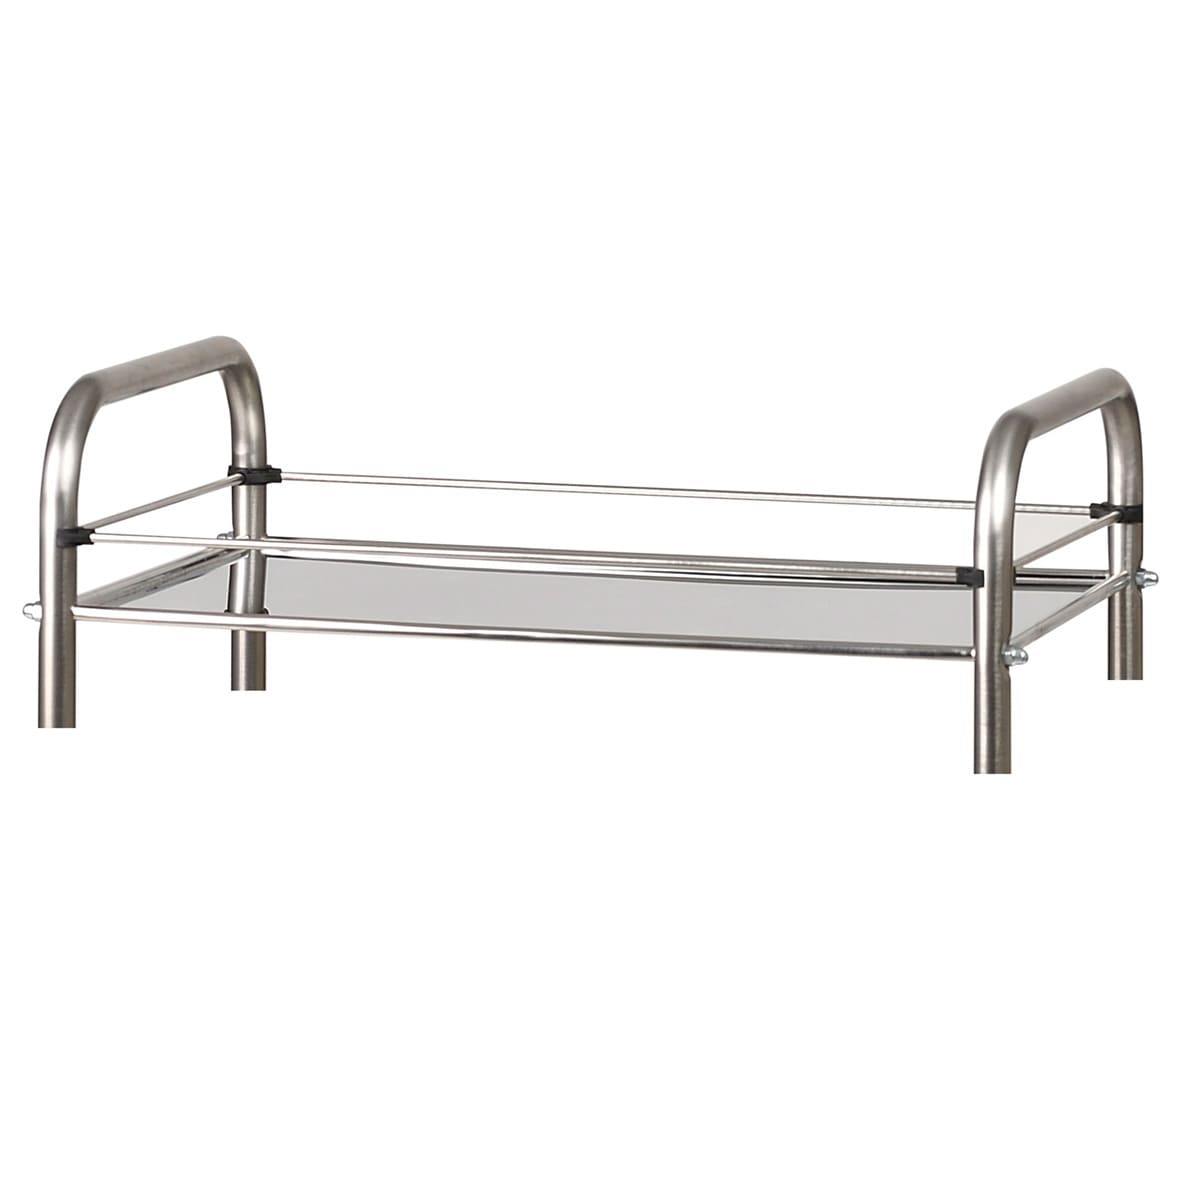 Set of 4 stainless steel guard rails for tray 60x40cm